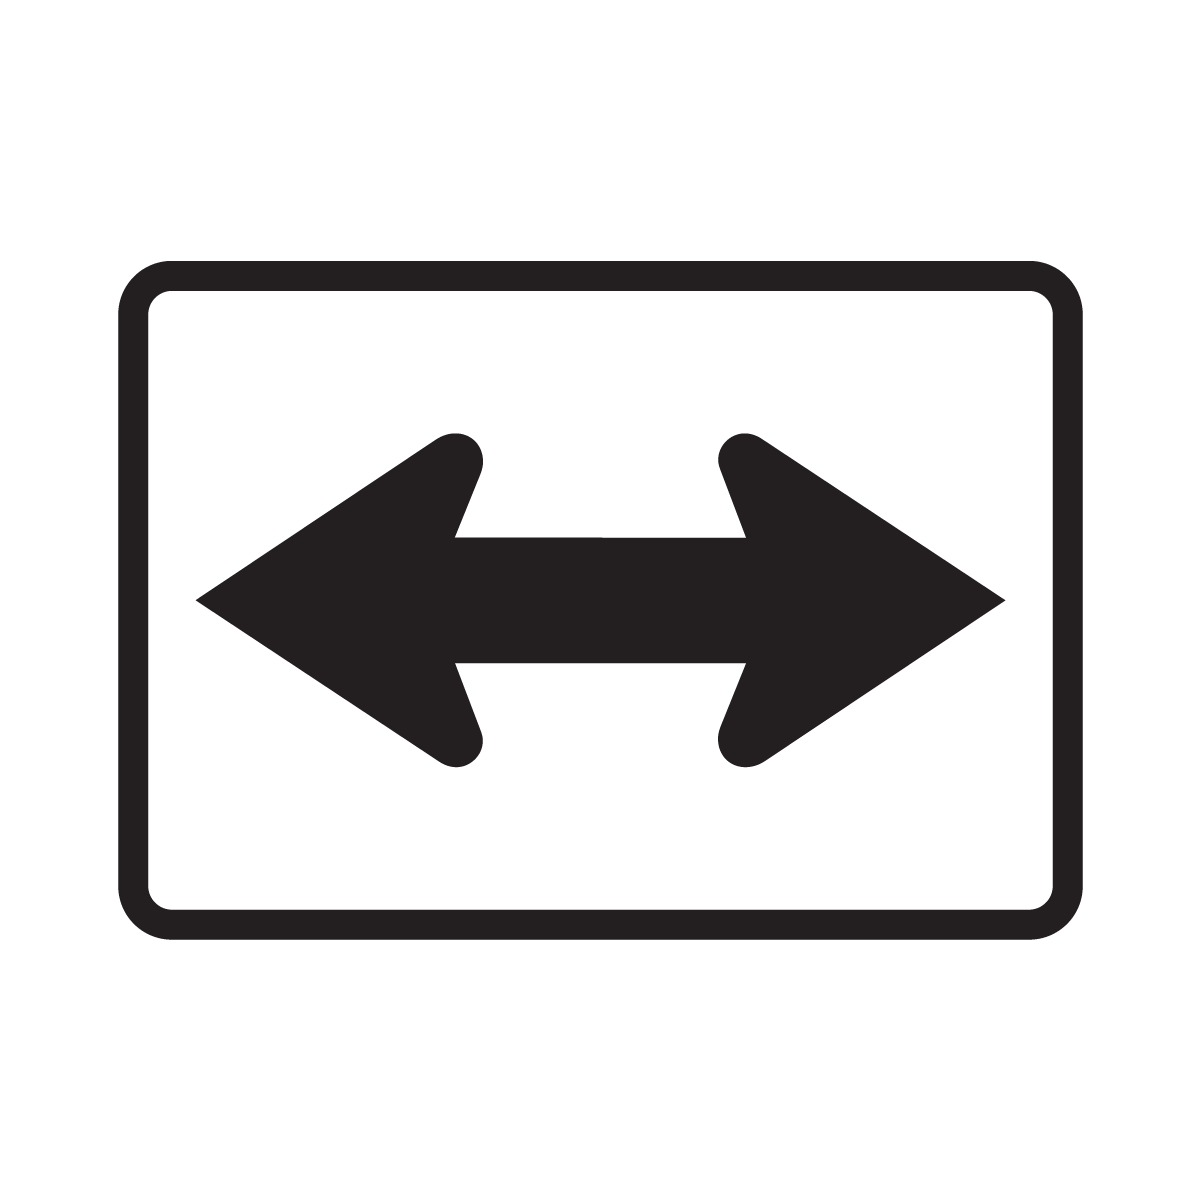 M6-4 Two-Direction Left / Right Turn Arrow